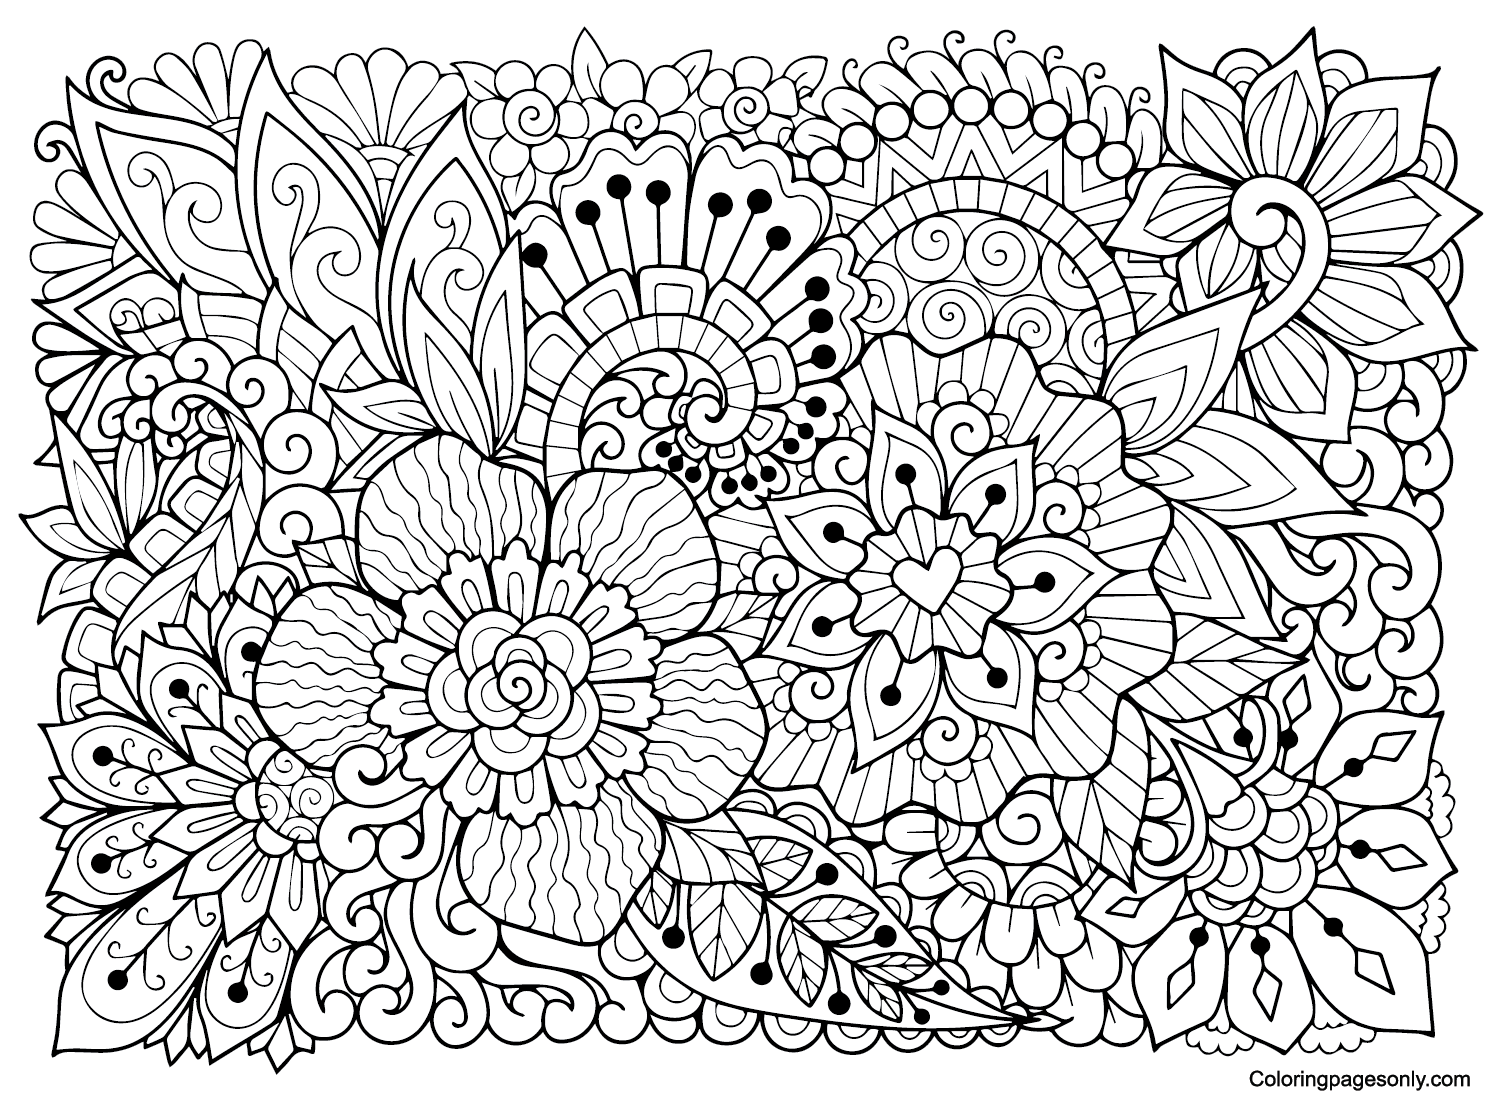 Mindfulness Pictures Coloring Page